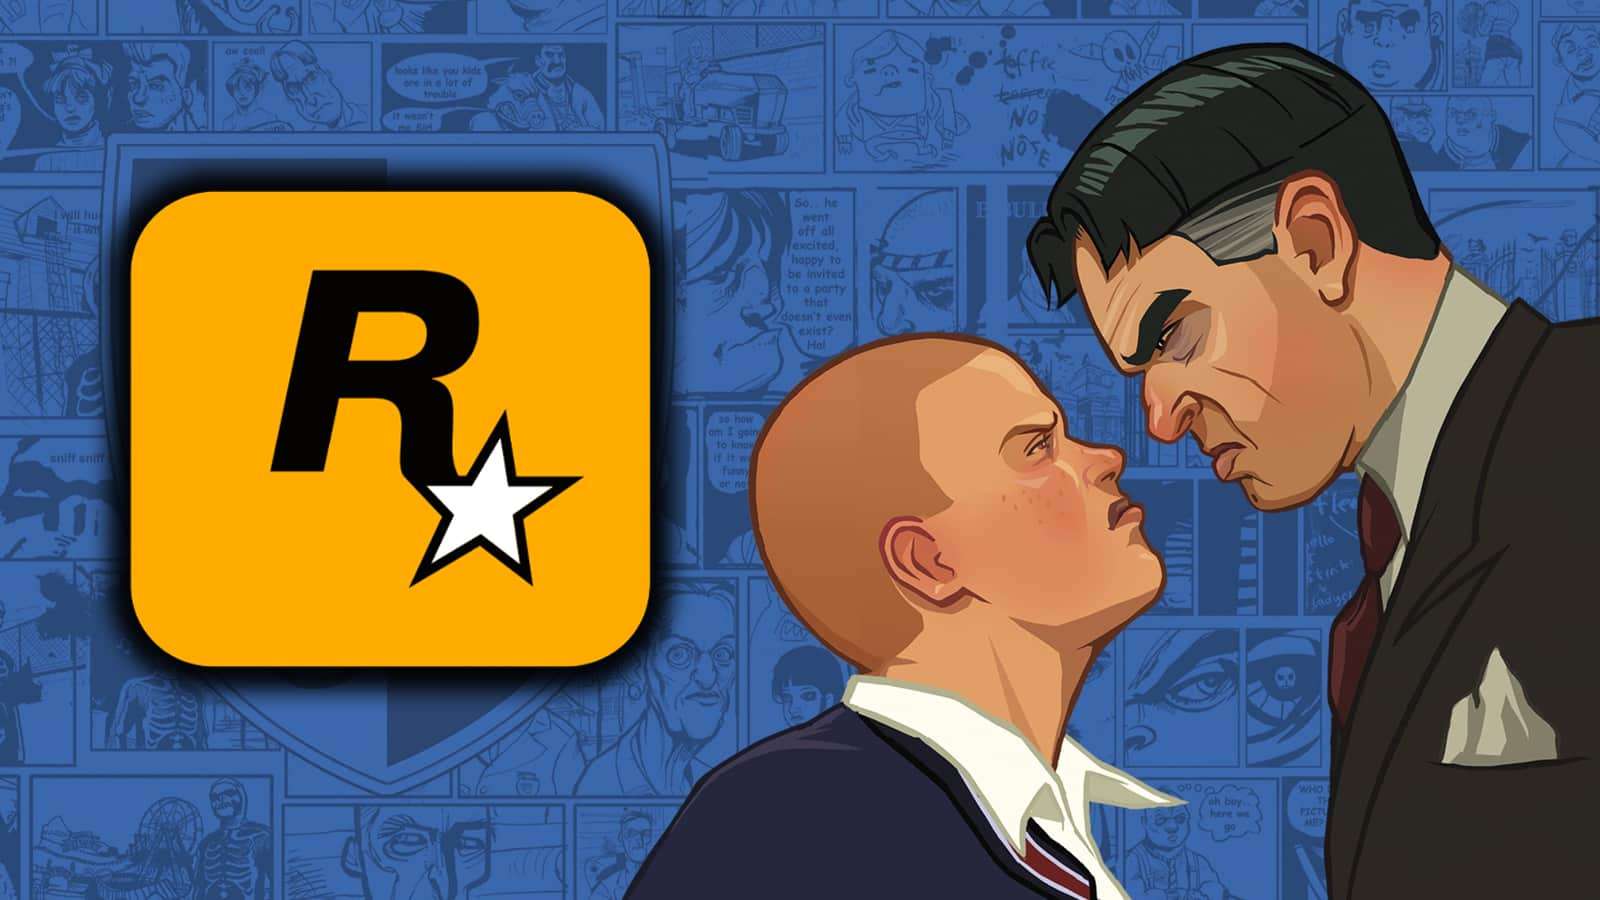 A screenshot of the game Bully by Rockstar Games.